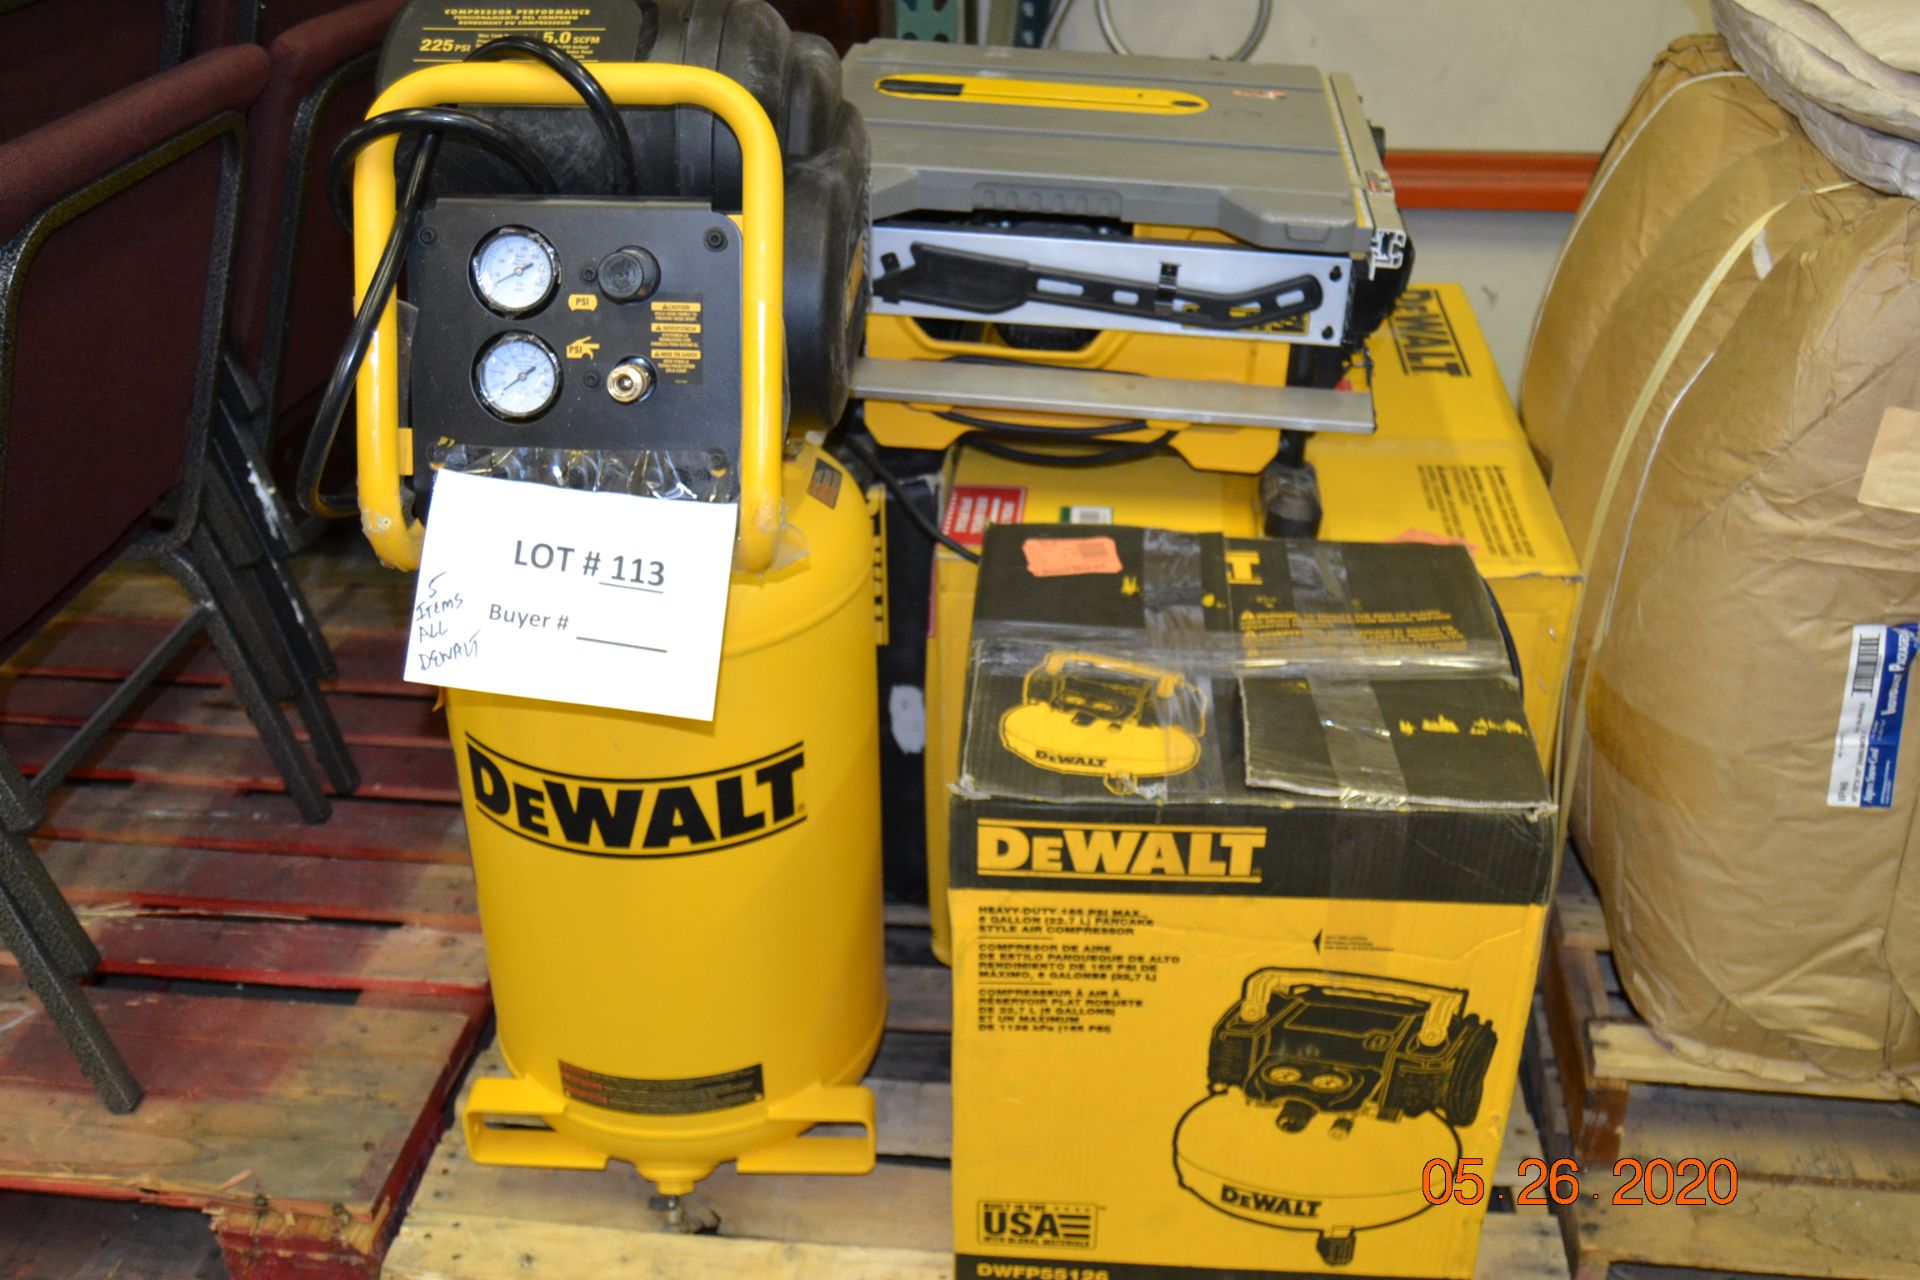 DEWALT ASSORTED, AIR COMPRESSORS, COMPOUND MITER SAW, TABLE SAW, DOUBLE BEVELED SLIDING MITER SAW(